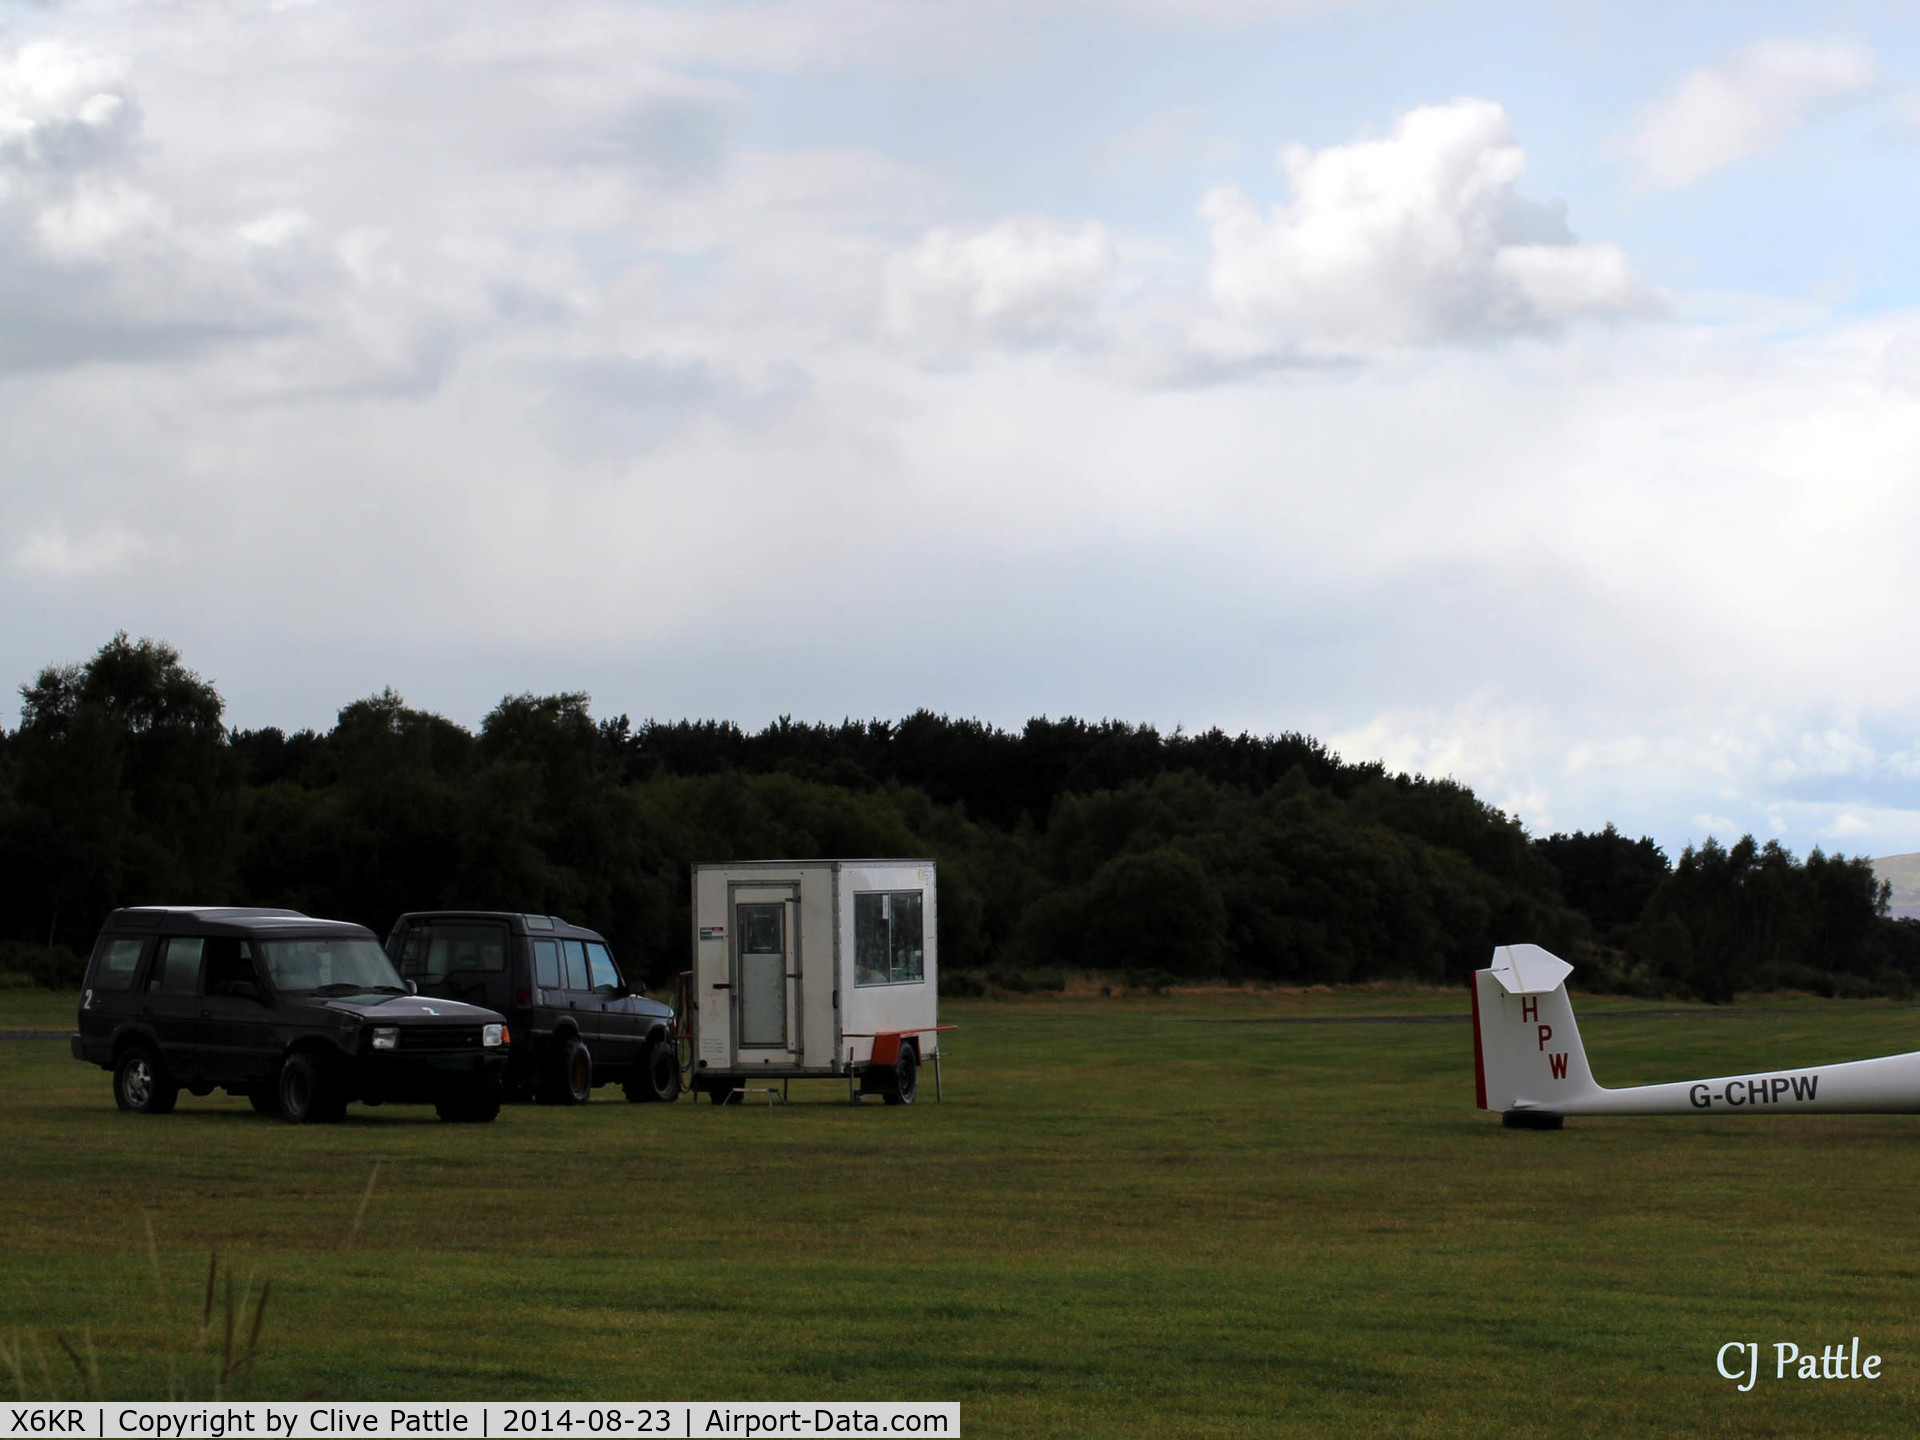 X6KR Airport - Portmoak Gliding Field, Kinross, Scotland. A view of the winch launch control cabin and two Land Rovers fitted with wide tyres for glider recovery.